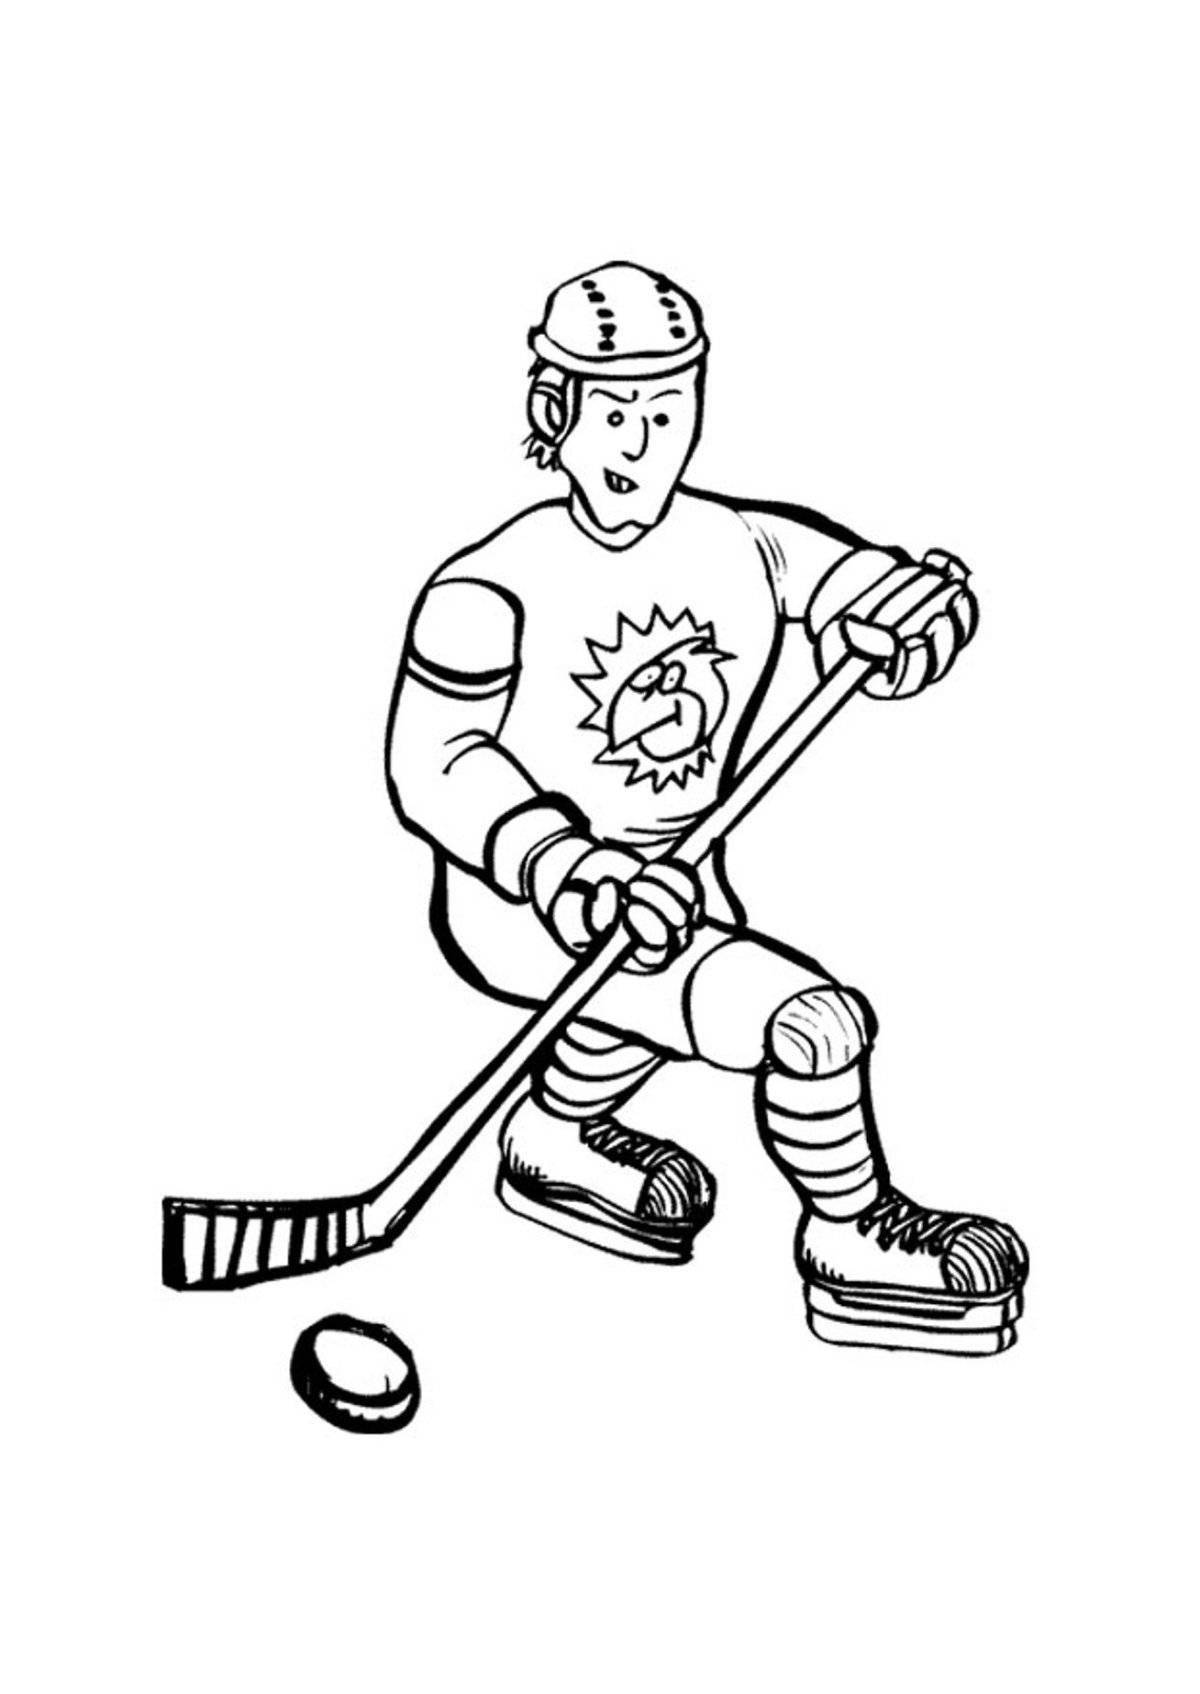 Amazing hockey coloring book for kids